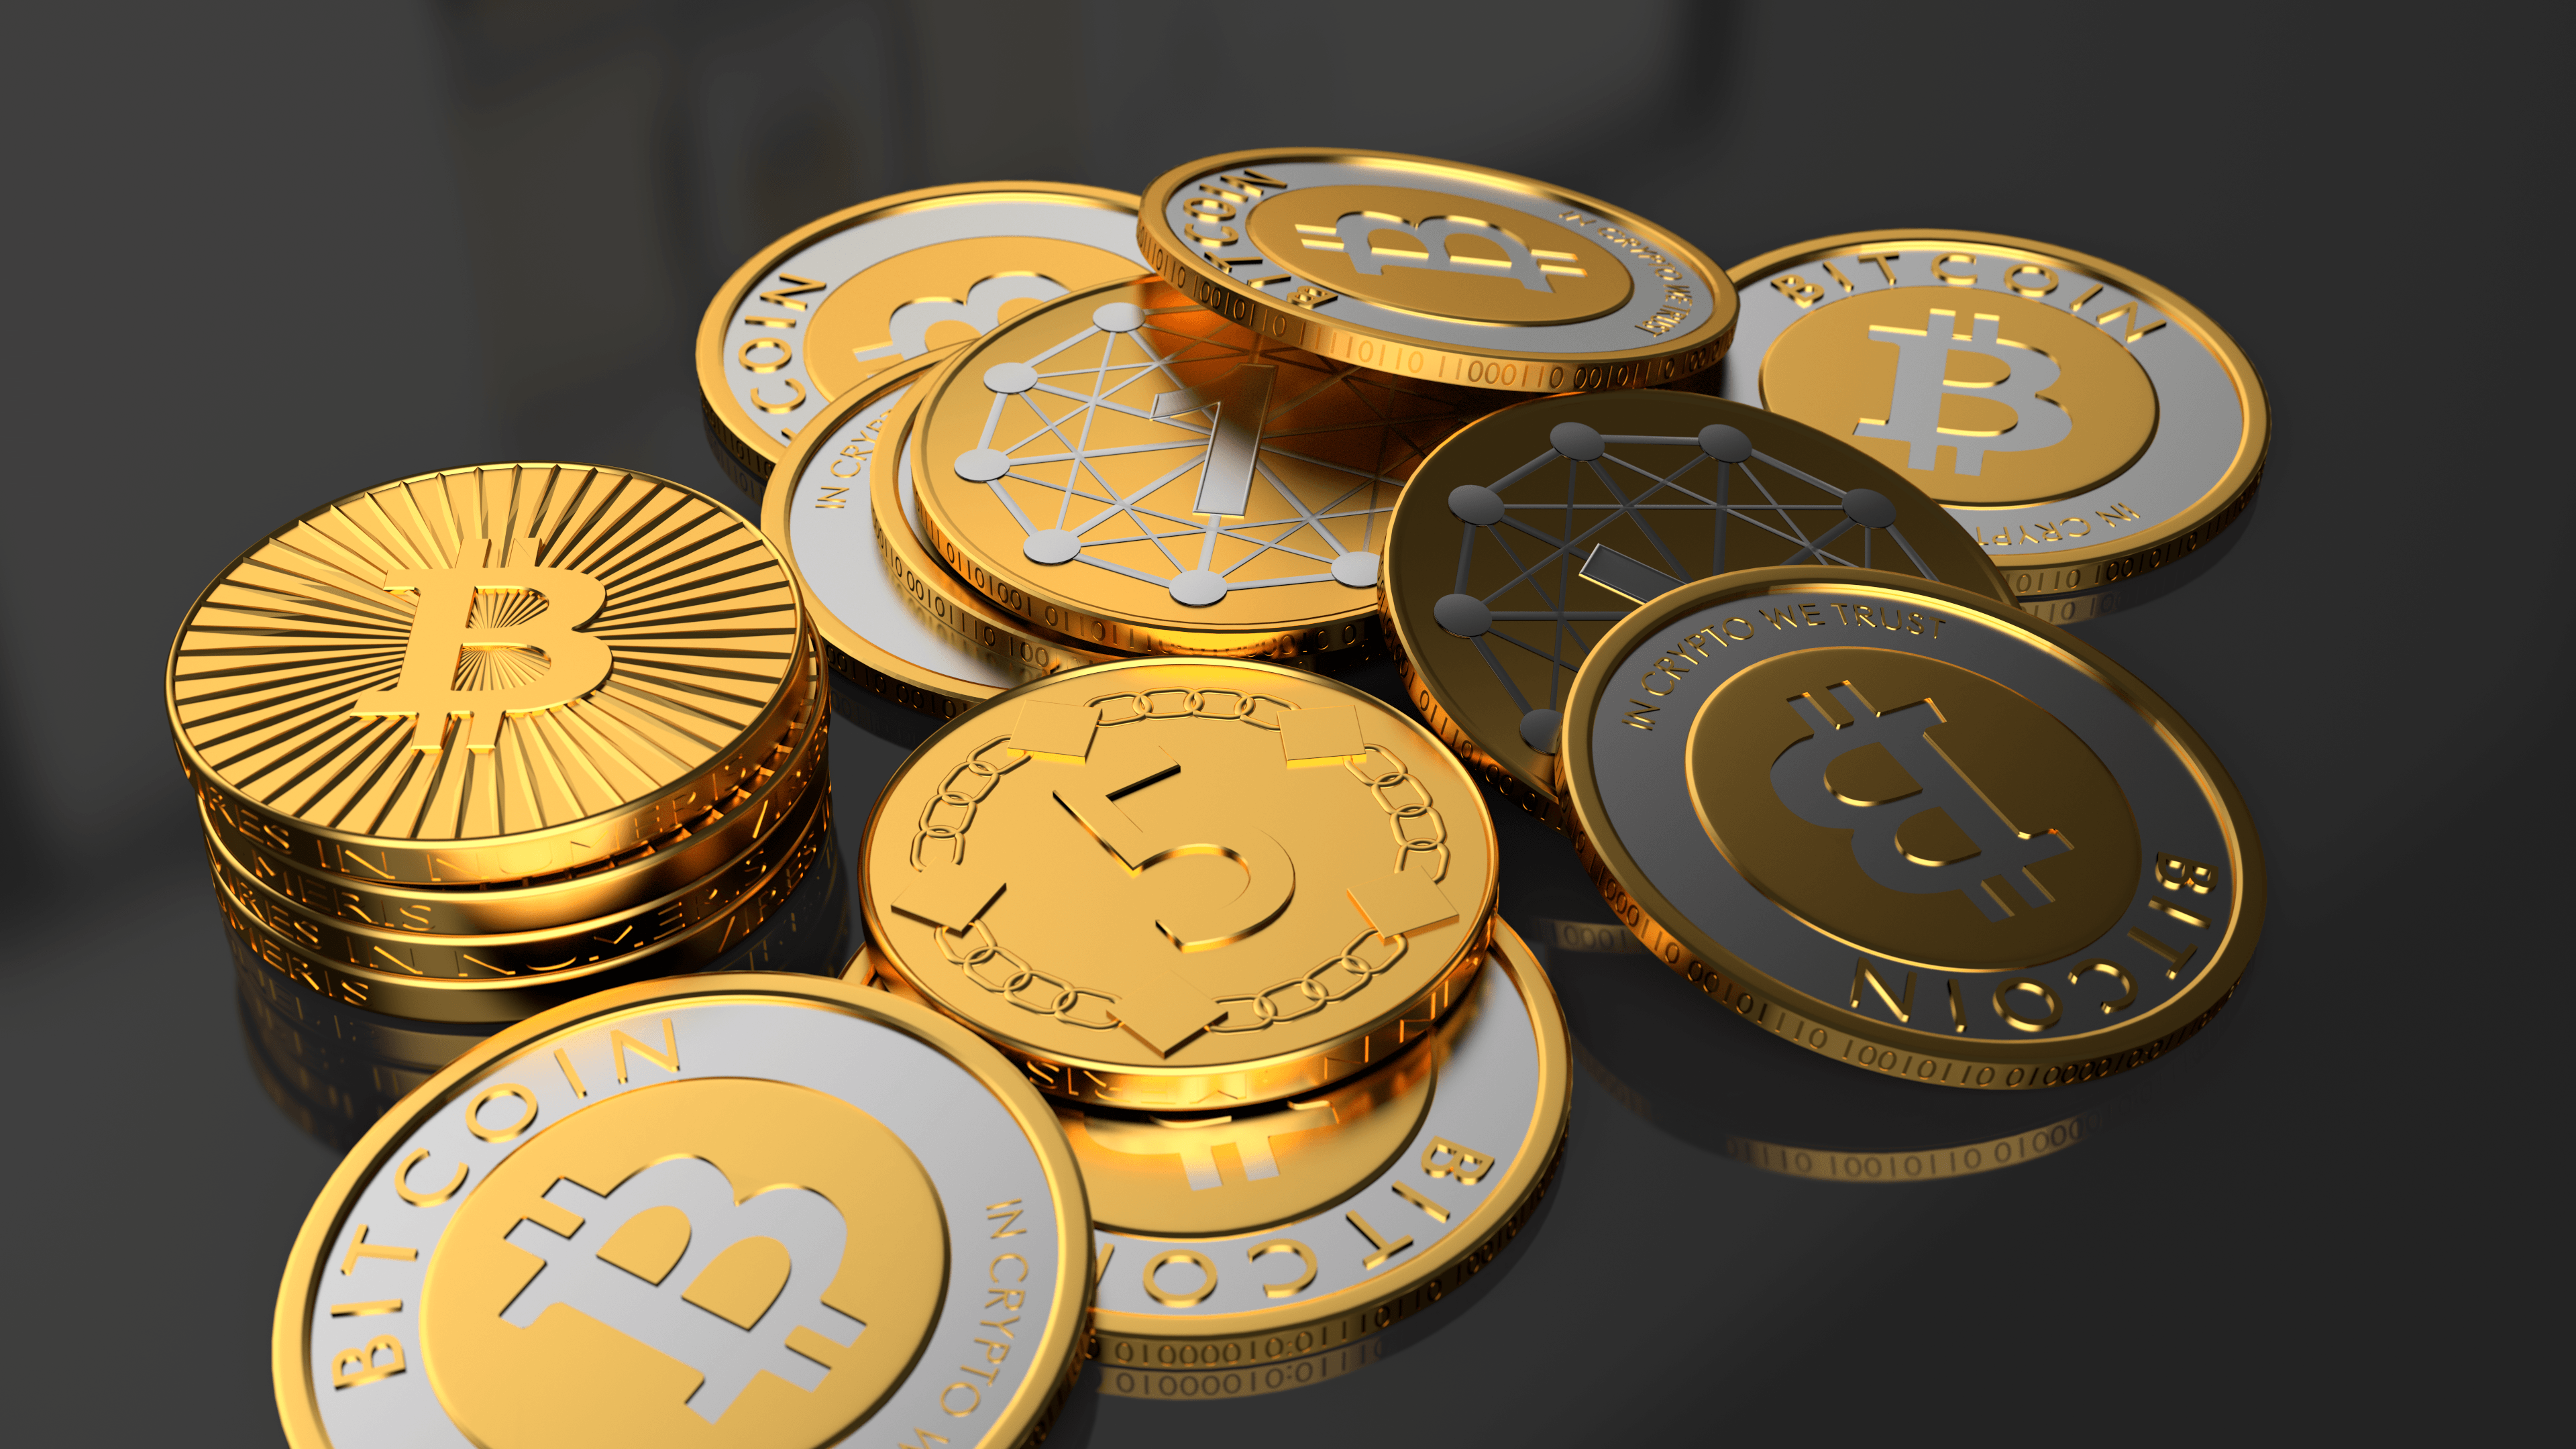 Cryptocurrency coins Bitcoin wallpaper and image